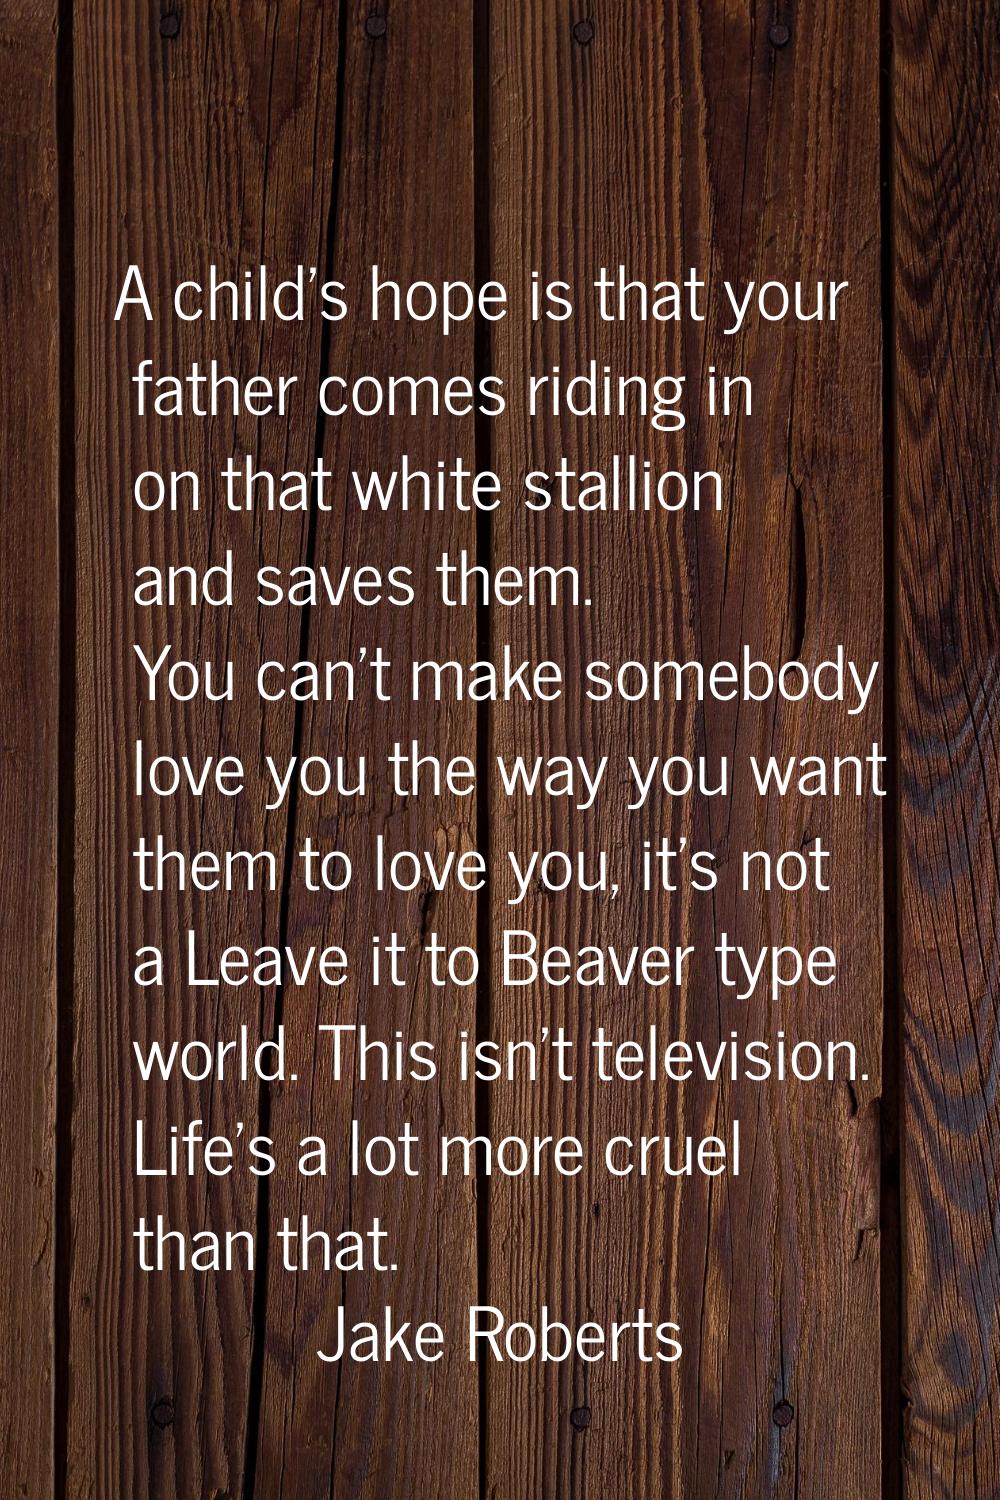 A child's hope is that your father comes riding in on that white stallion and saves them. You can't